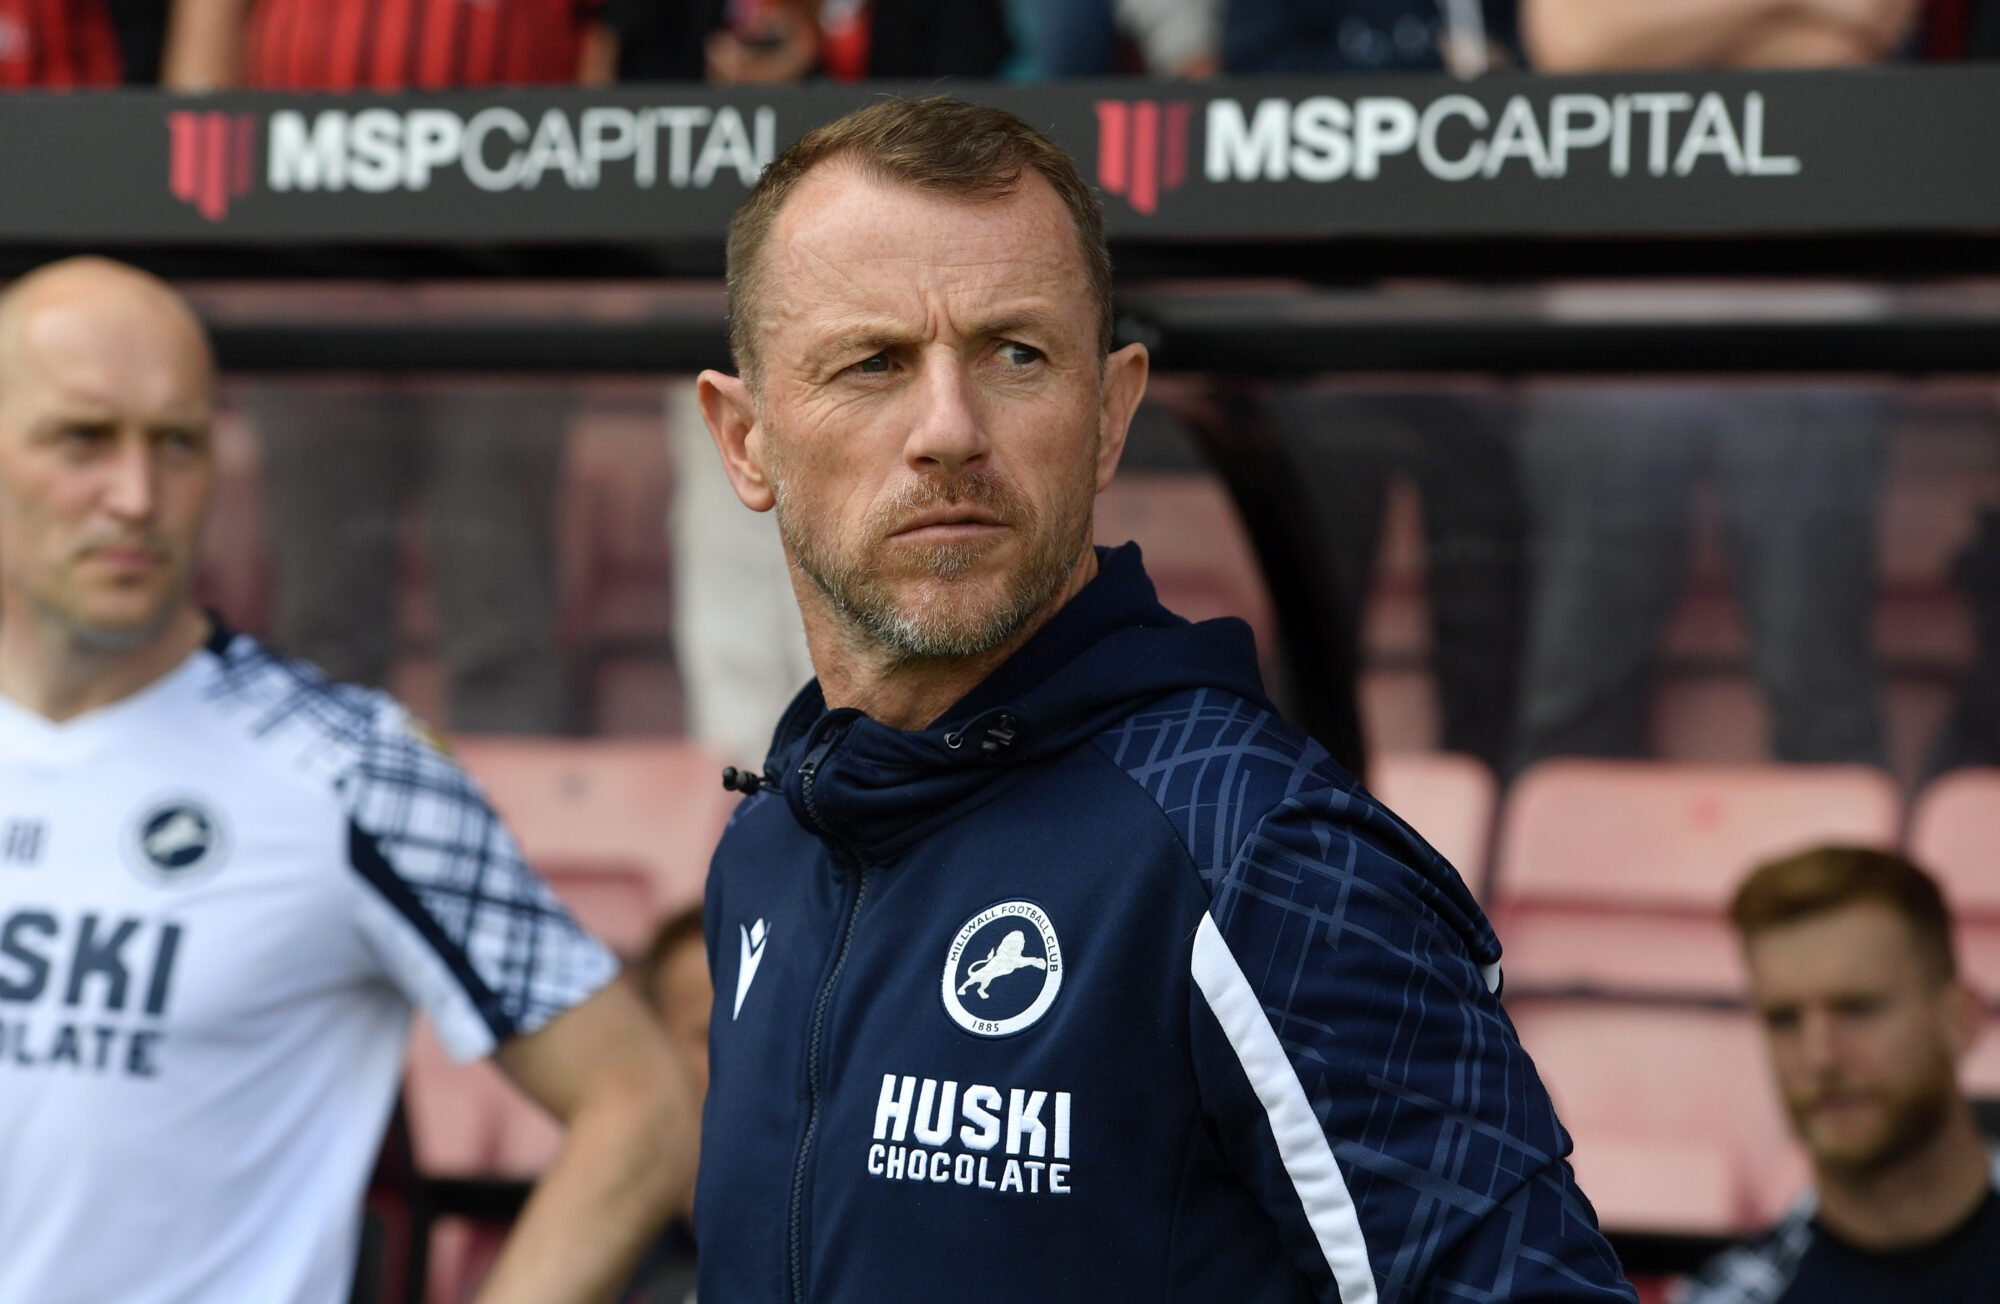 Rowett has no plans to move on from Millwall – South London News